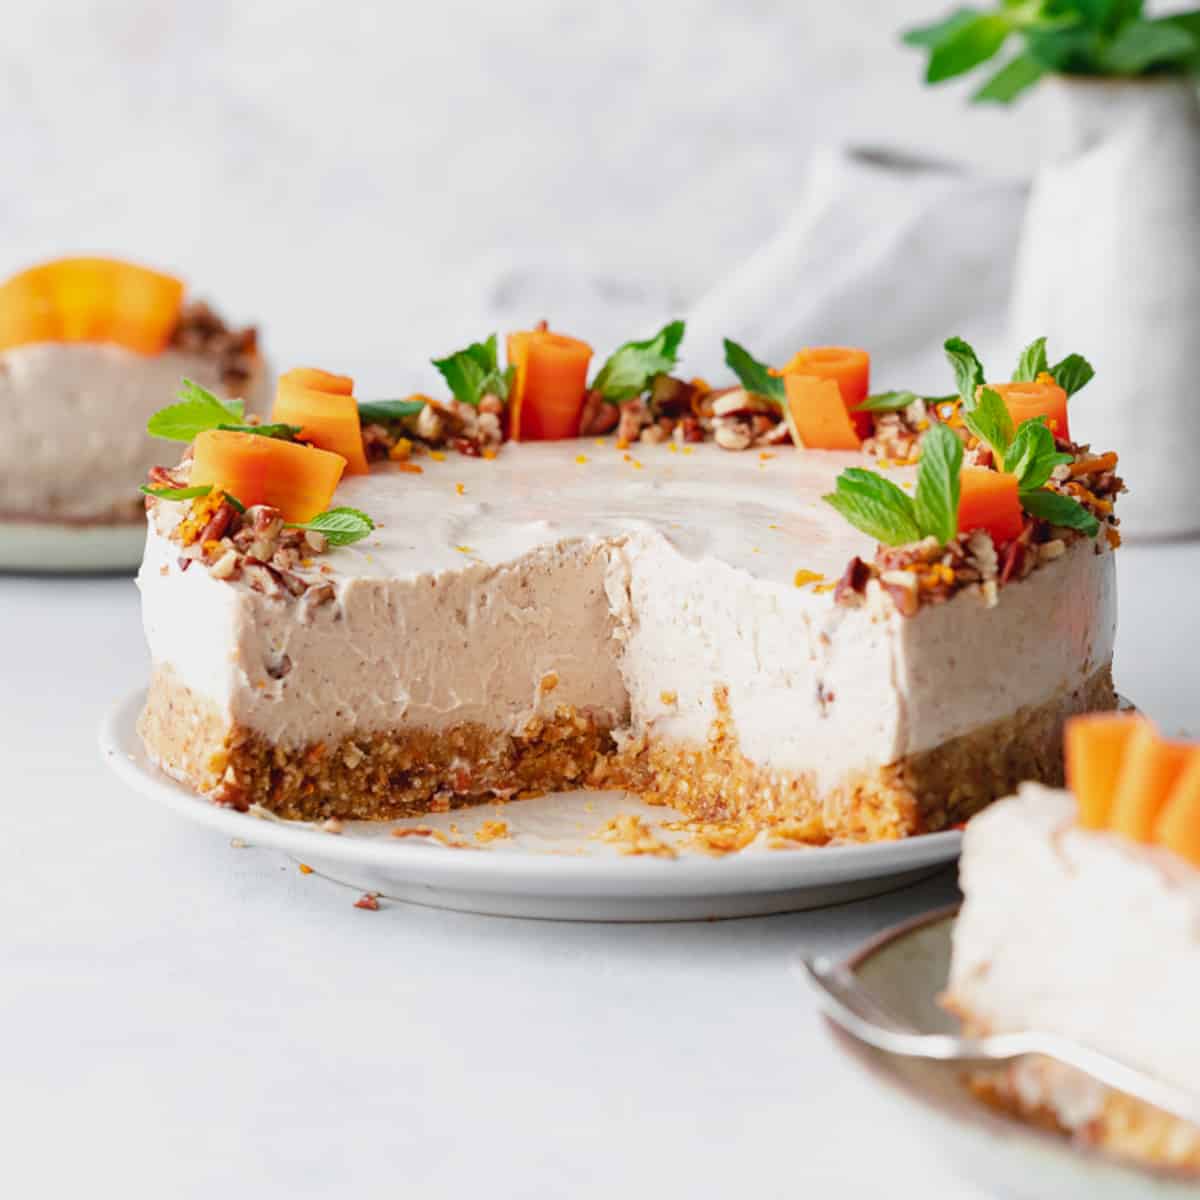 Rum Carrot Cake with a Boozy Cream Cheese Frosting | Liquid Culture